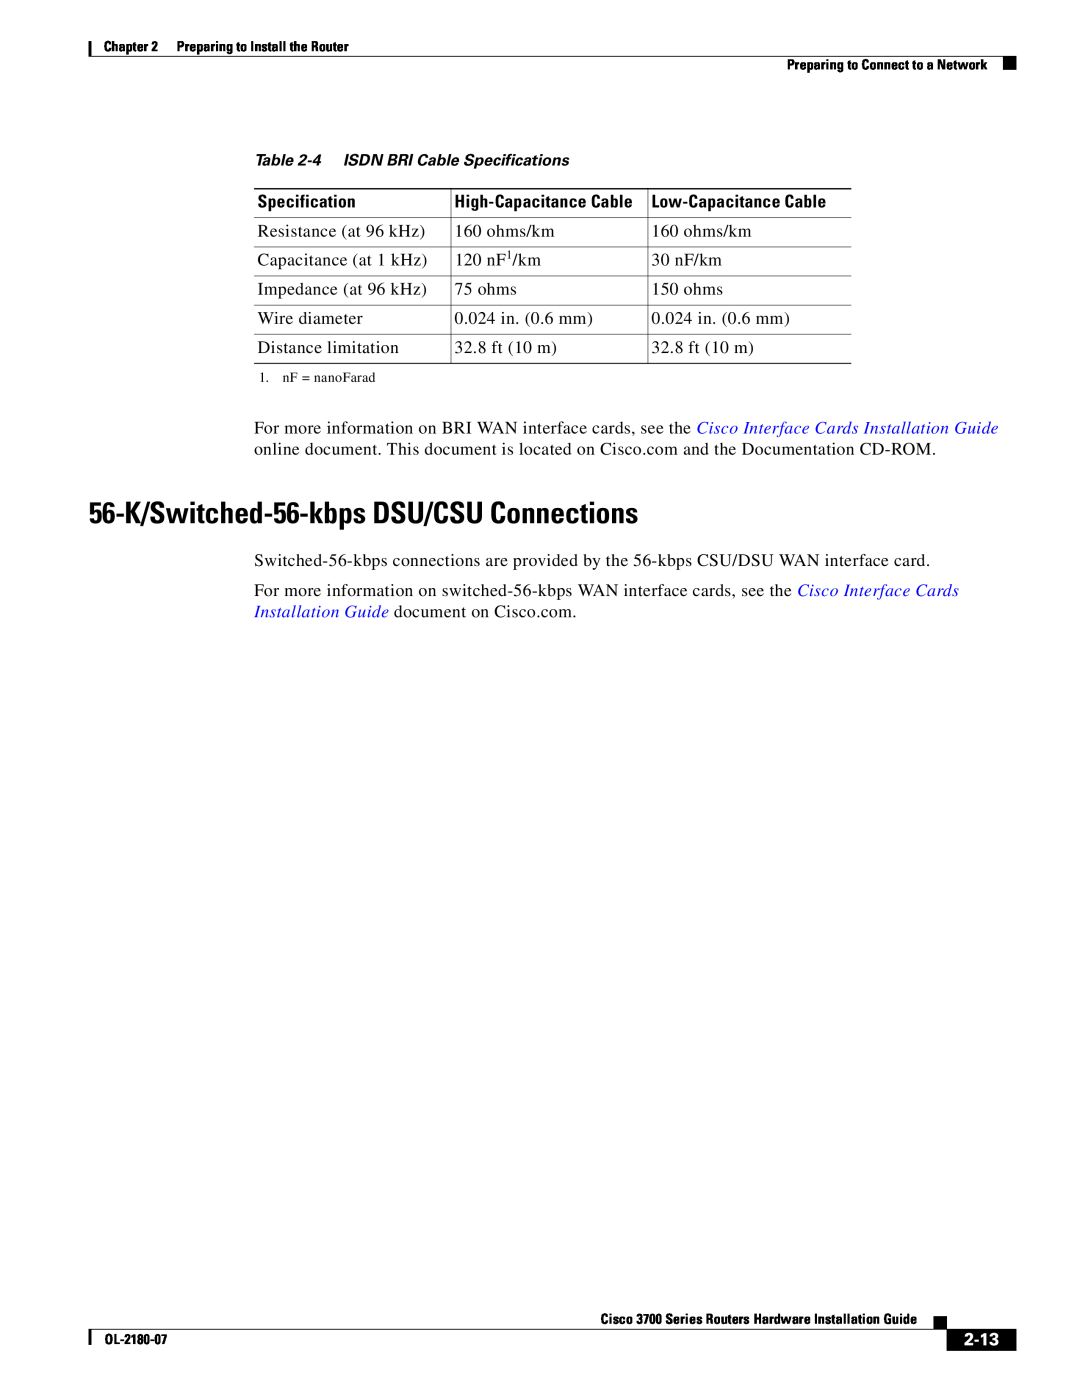 Cisco Systems 3700 Series manual 56-K/Switched-56-kbps DSU/CSU Connections, 2-13, High-Capacitance Cable 